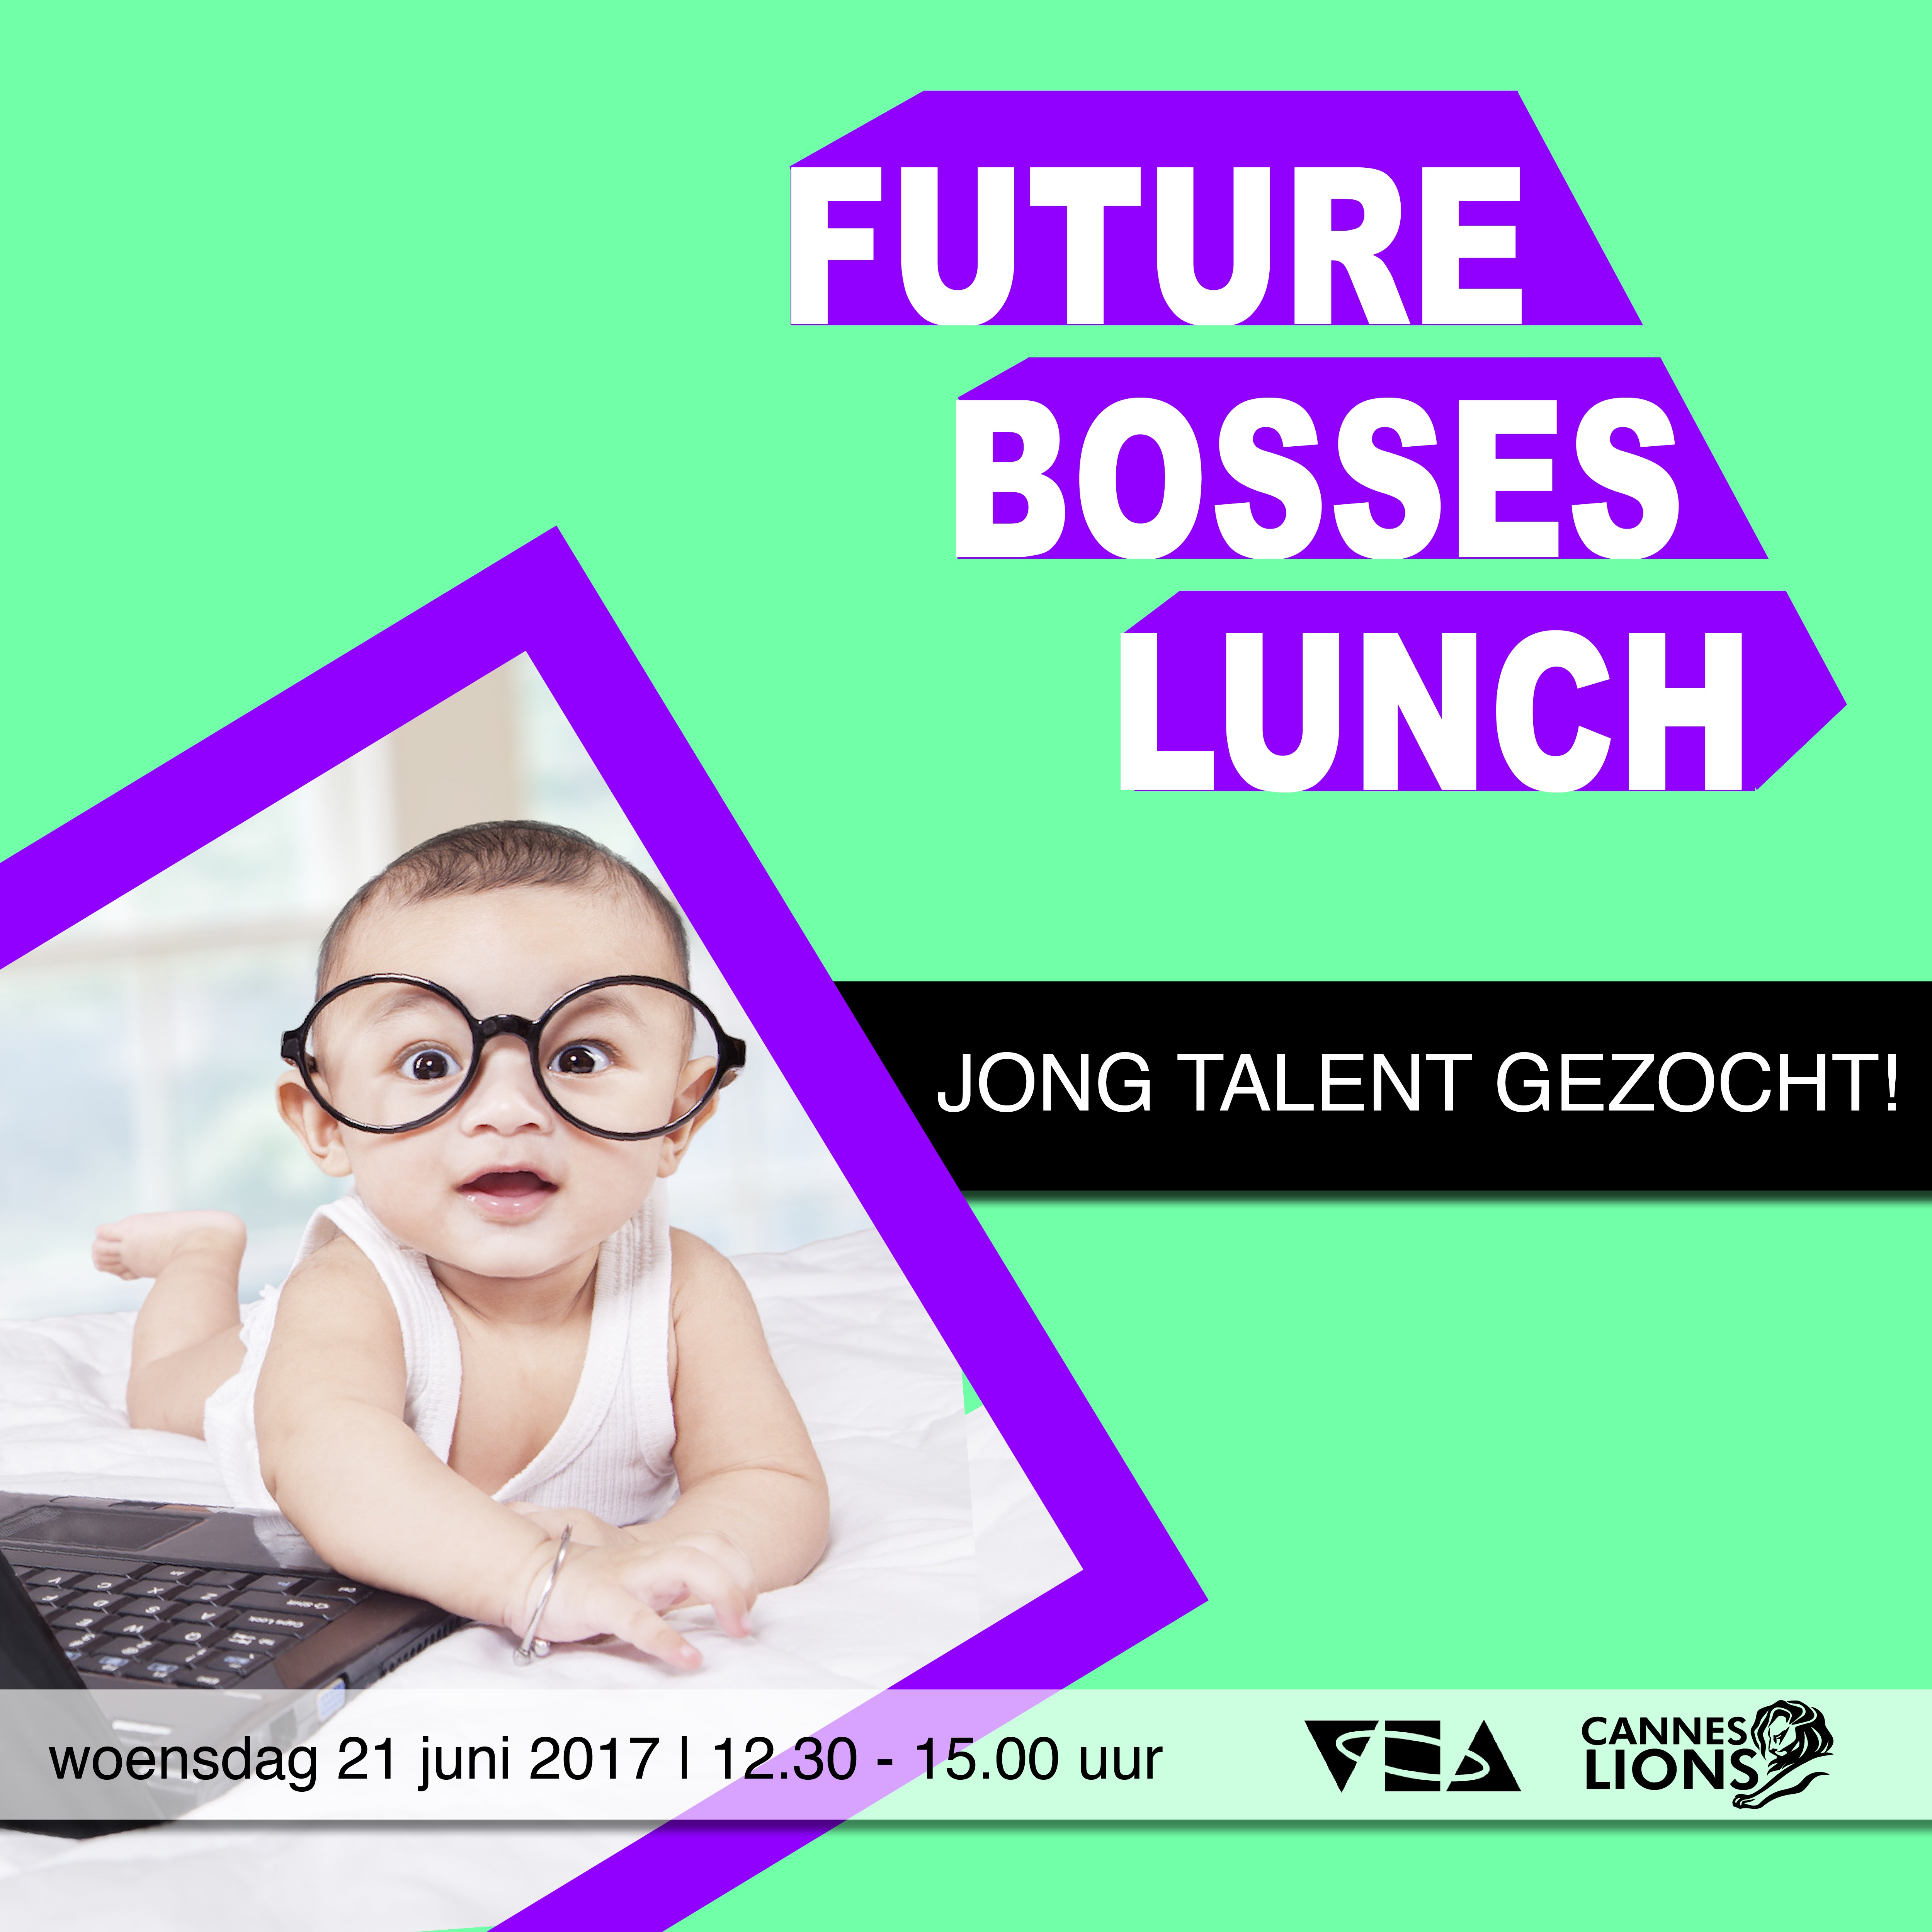 Wanted: future bosses